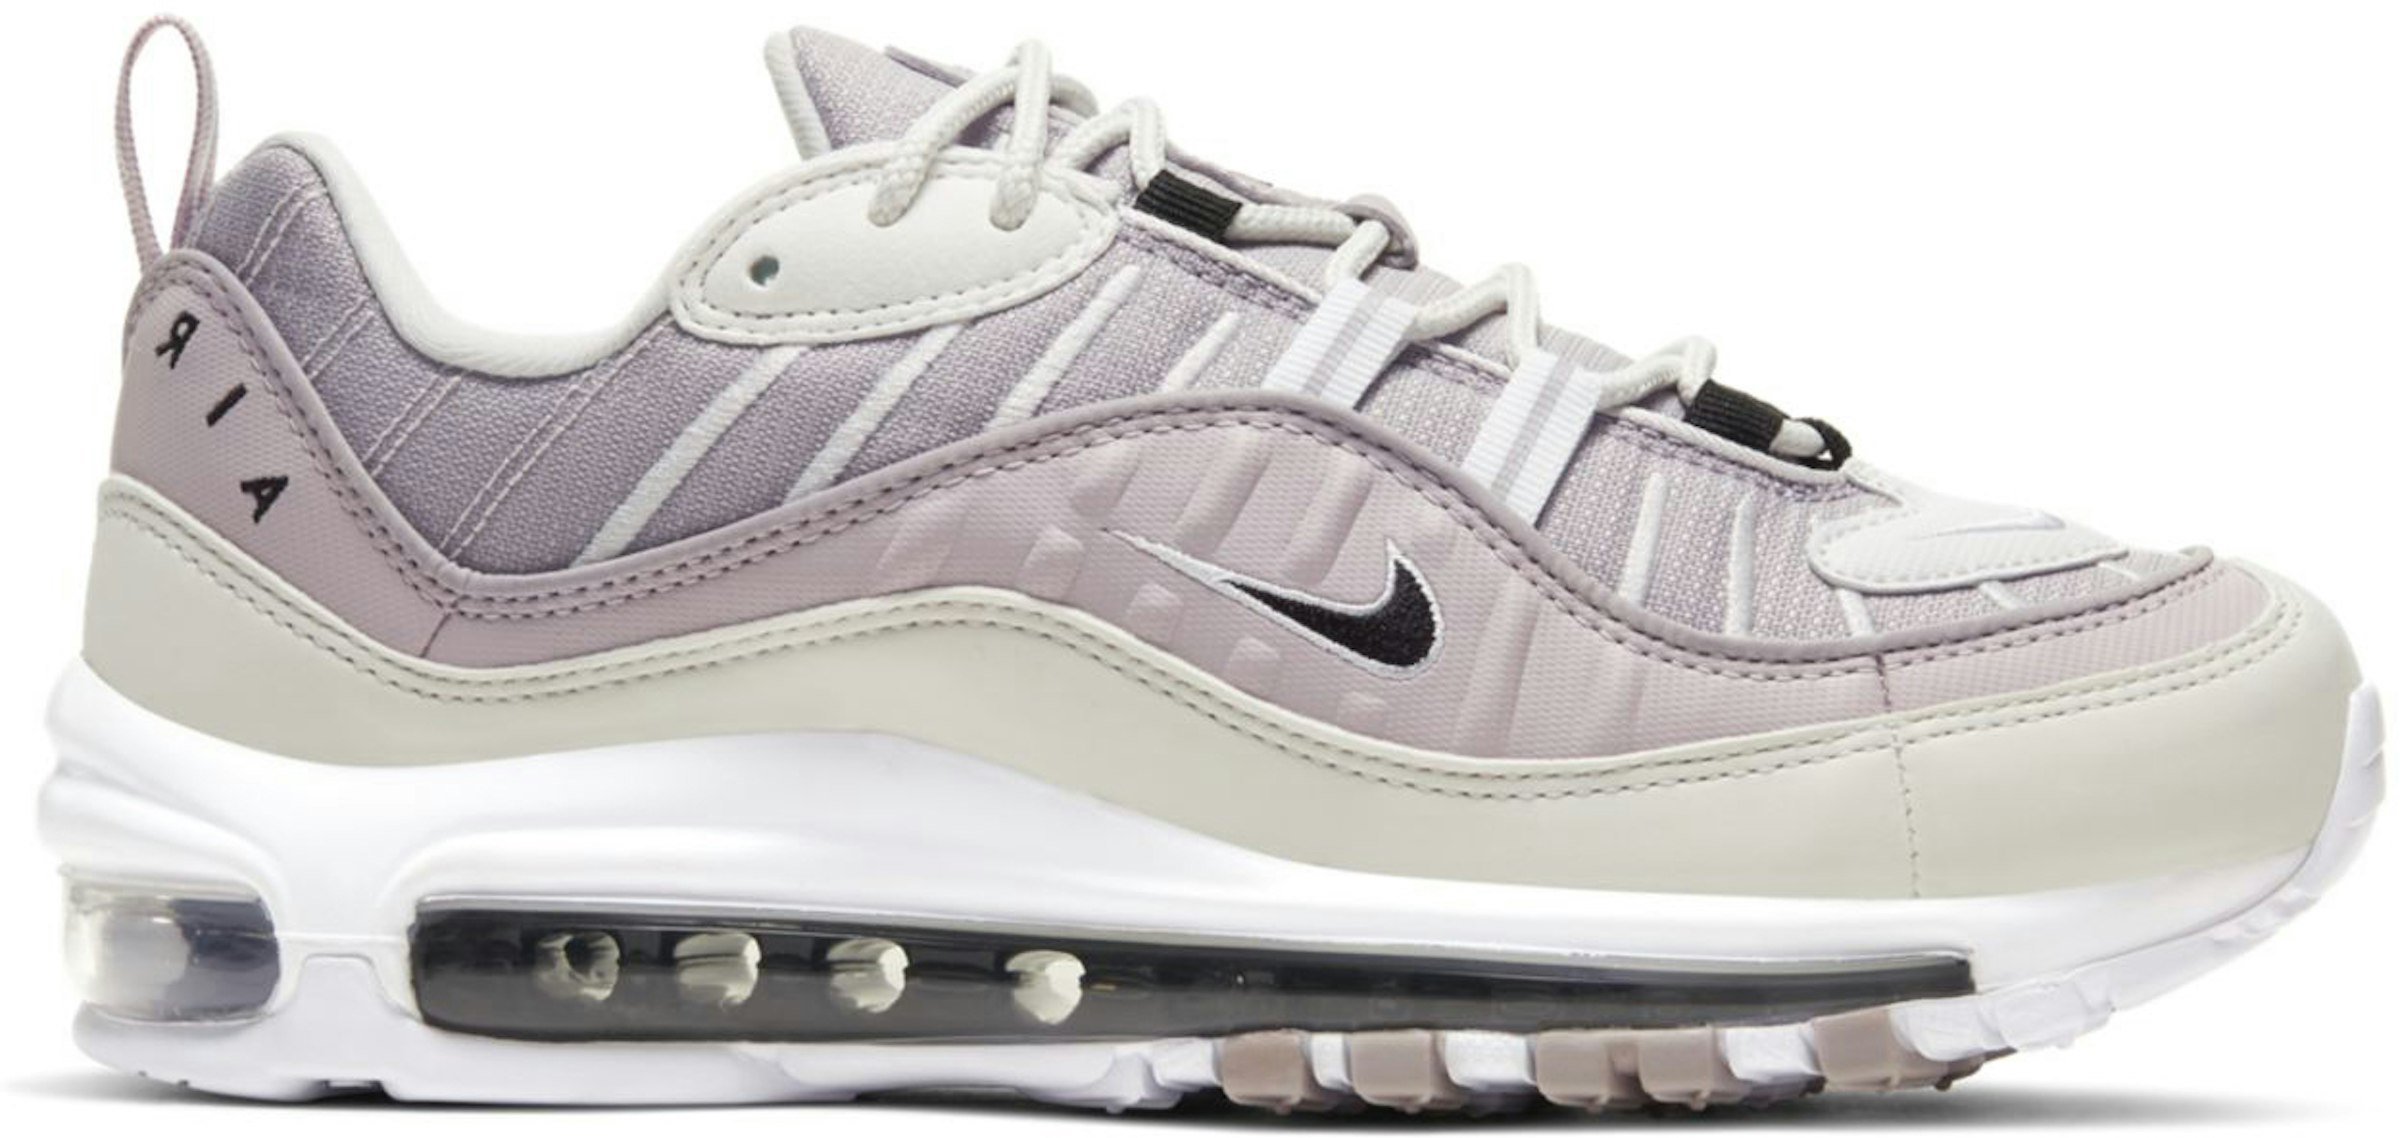 Autocomplacencia imán Dar permiso Buy Nike Air Max 98 Shoes & New Sneakers - StockX